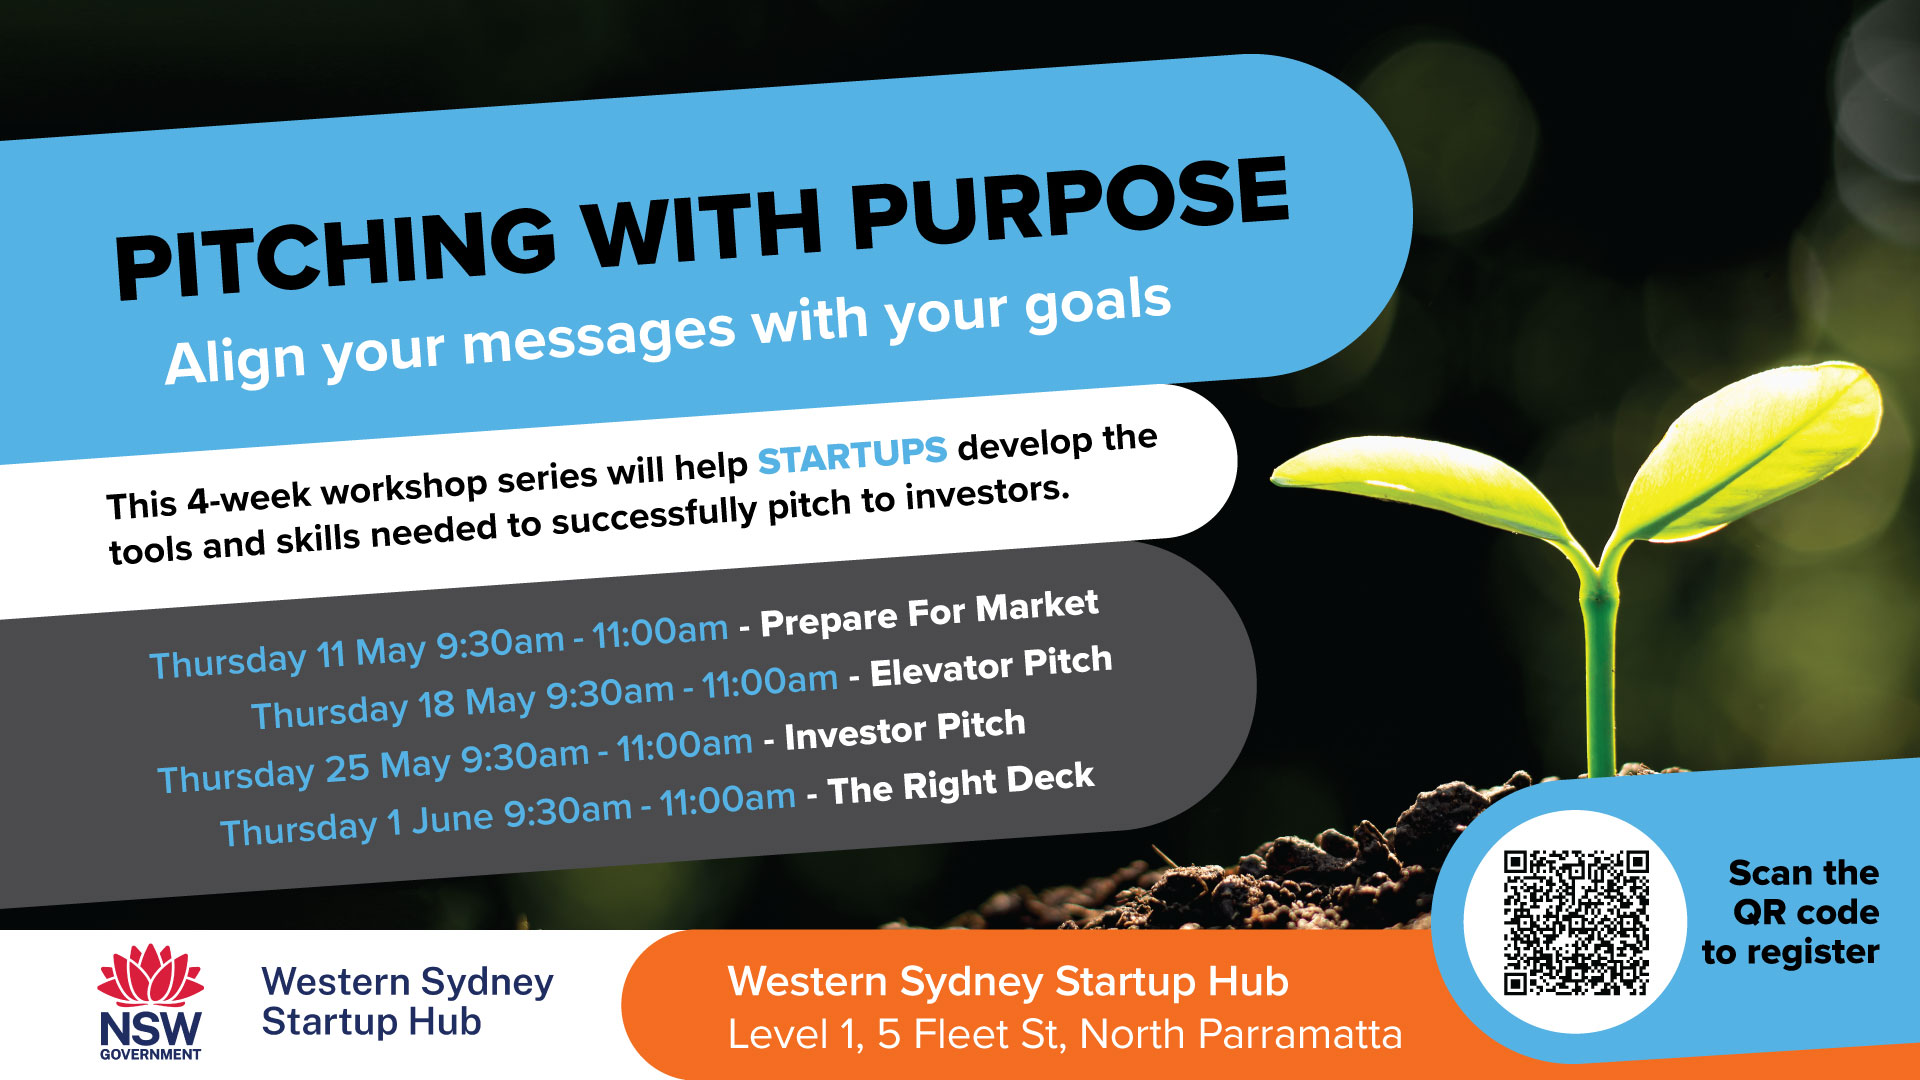 4 week workshop series 11/05/23 9:30-11 prepare for market, 18/05/23 9:30-11 Elevator pitch, 25/05/23 9:30-11 Investor pitch, 01/06/23 The right deck